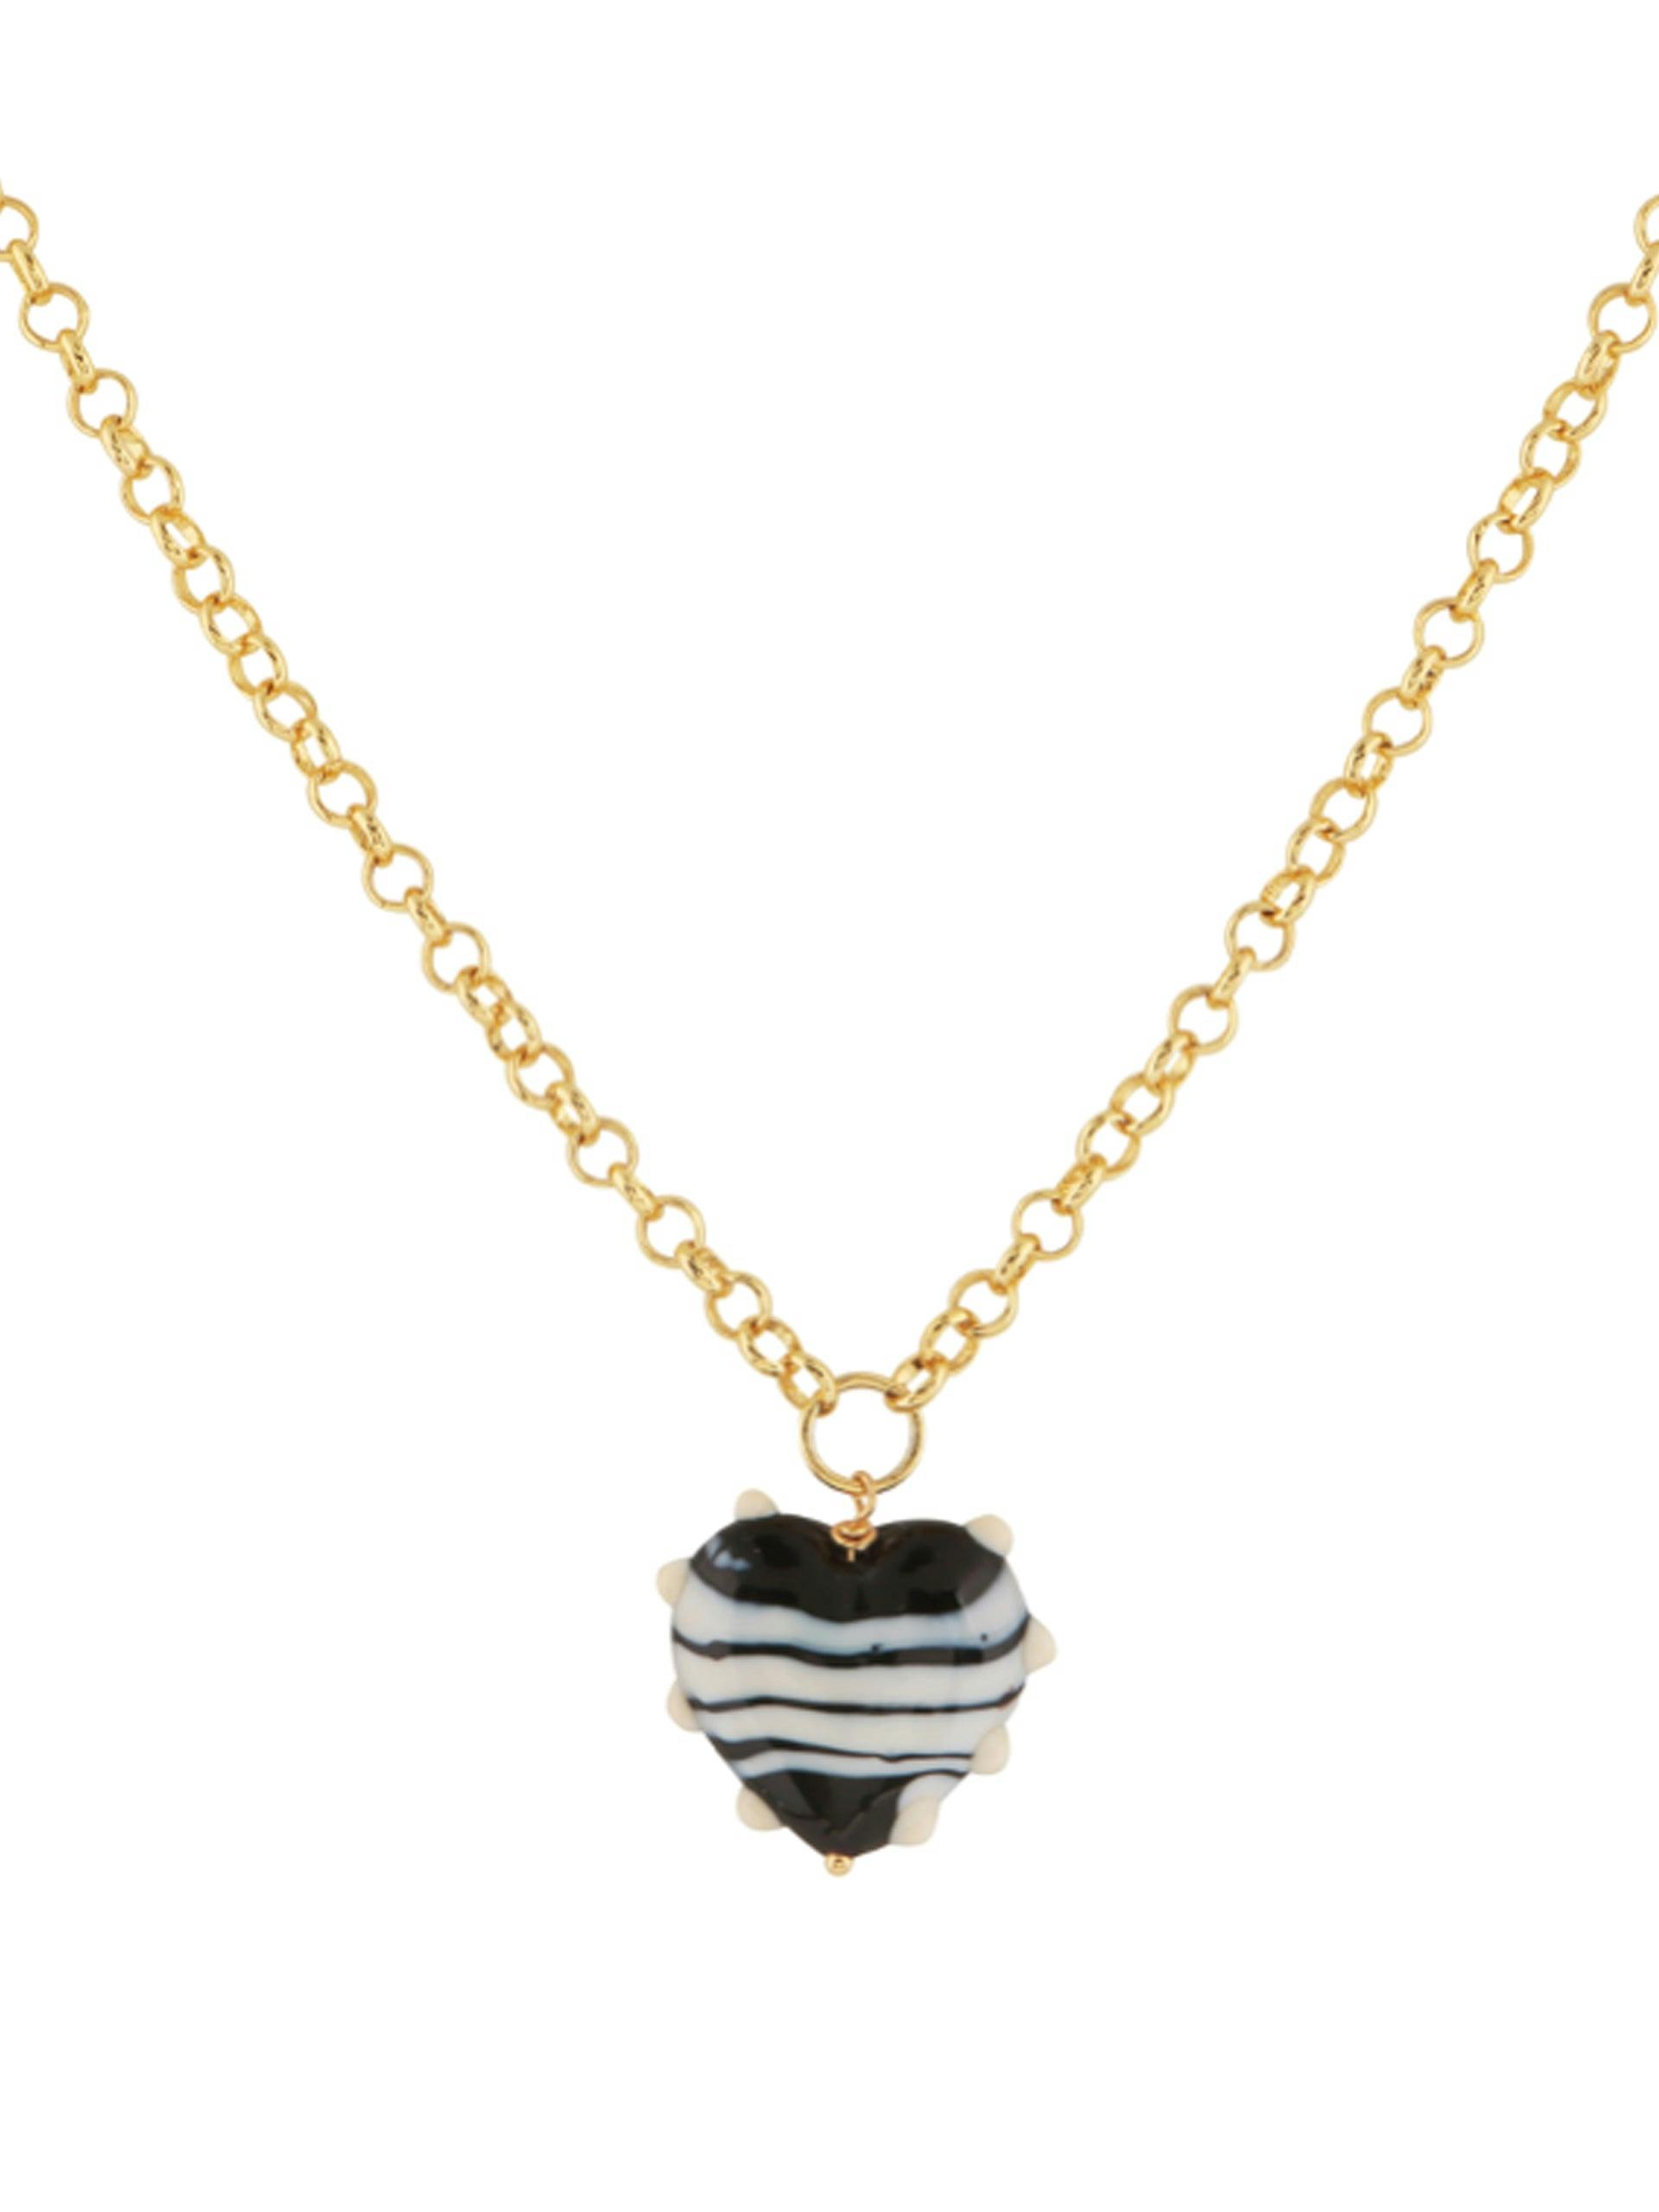 Extra-large black and ivory Milagros Heart and belcher chain necklace